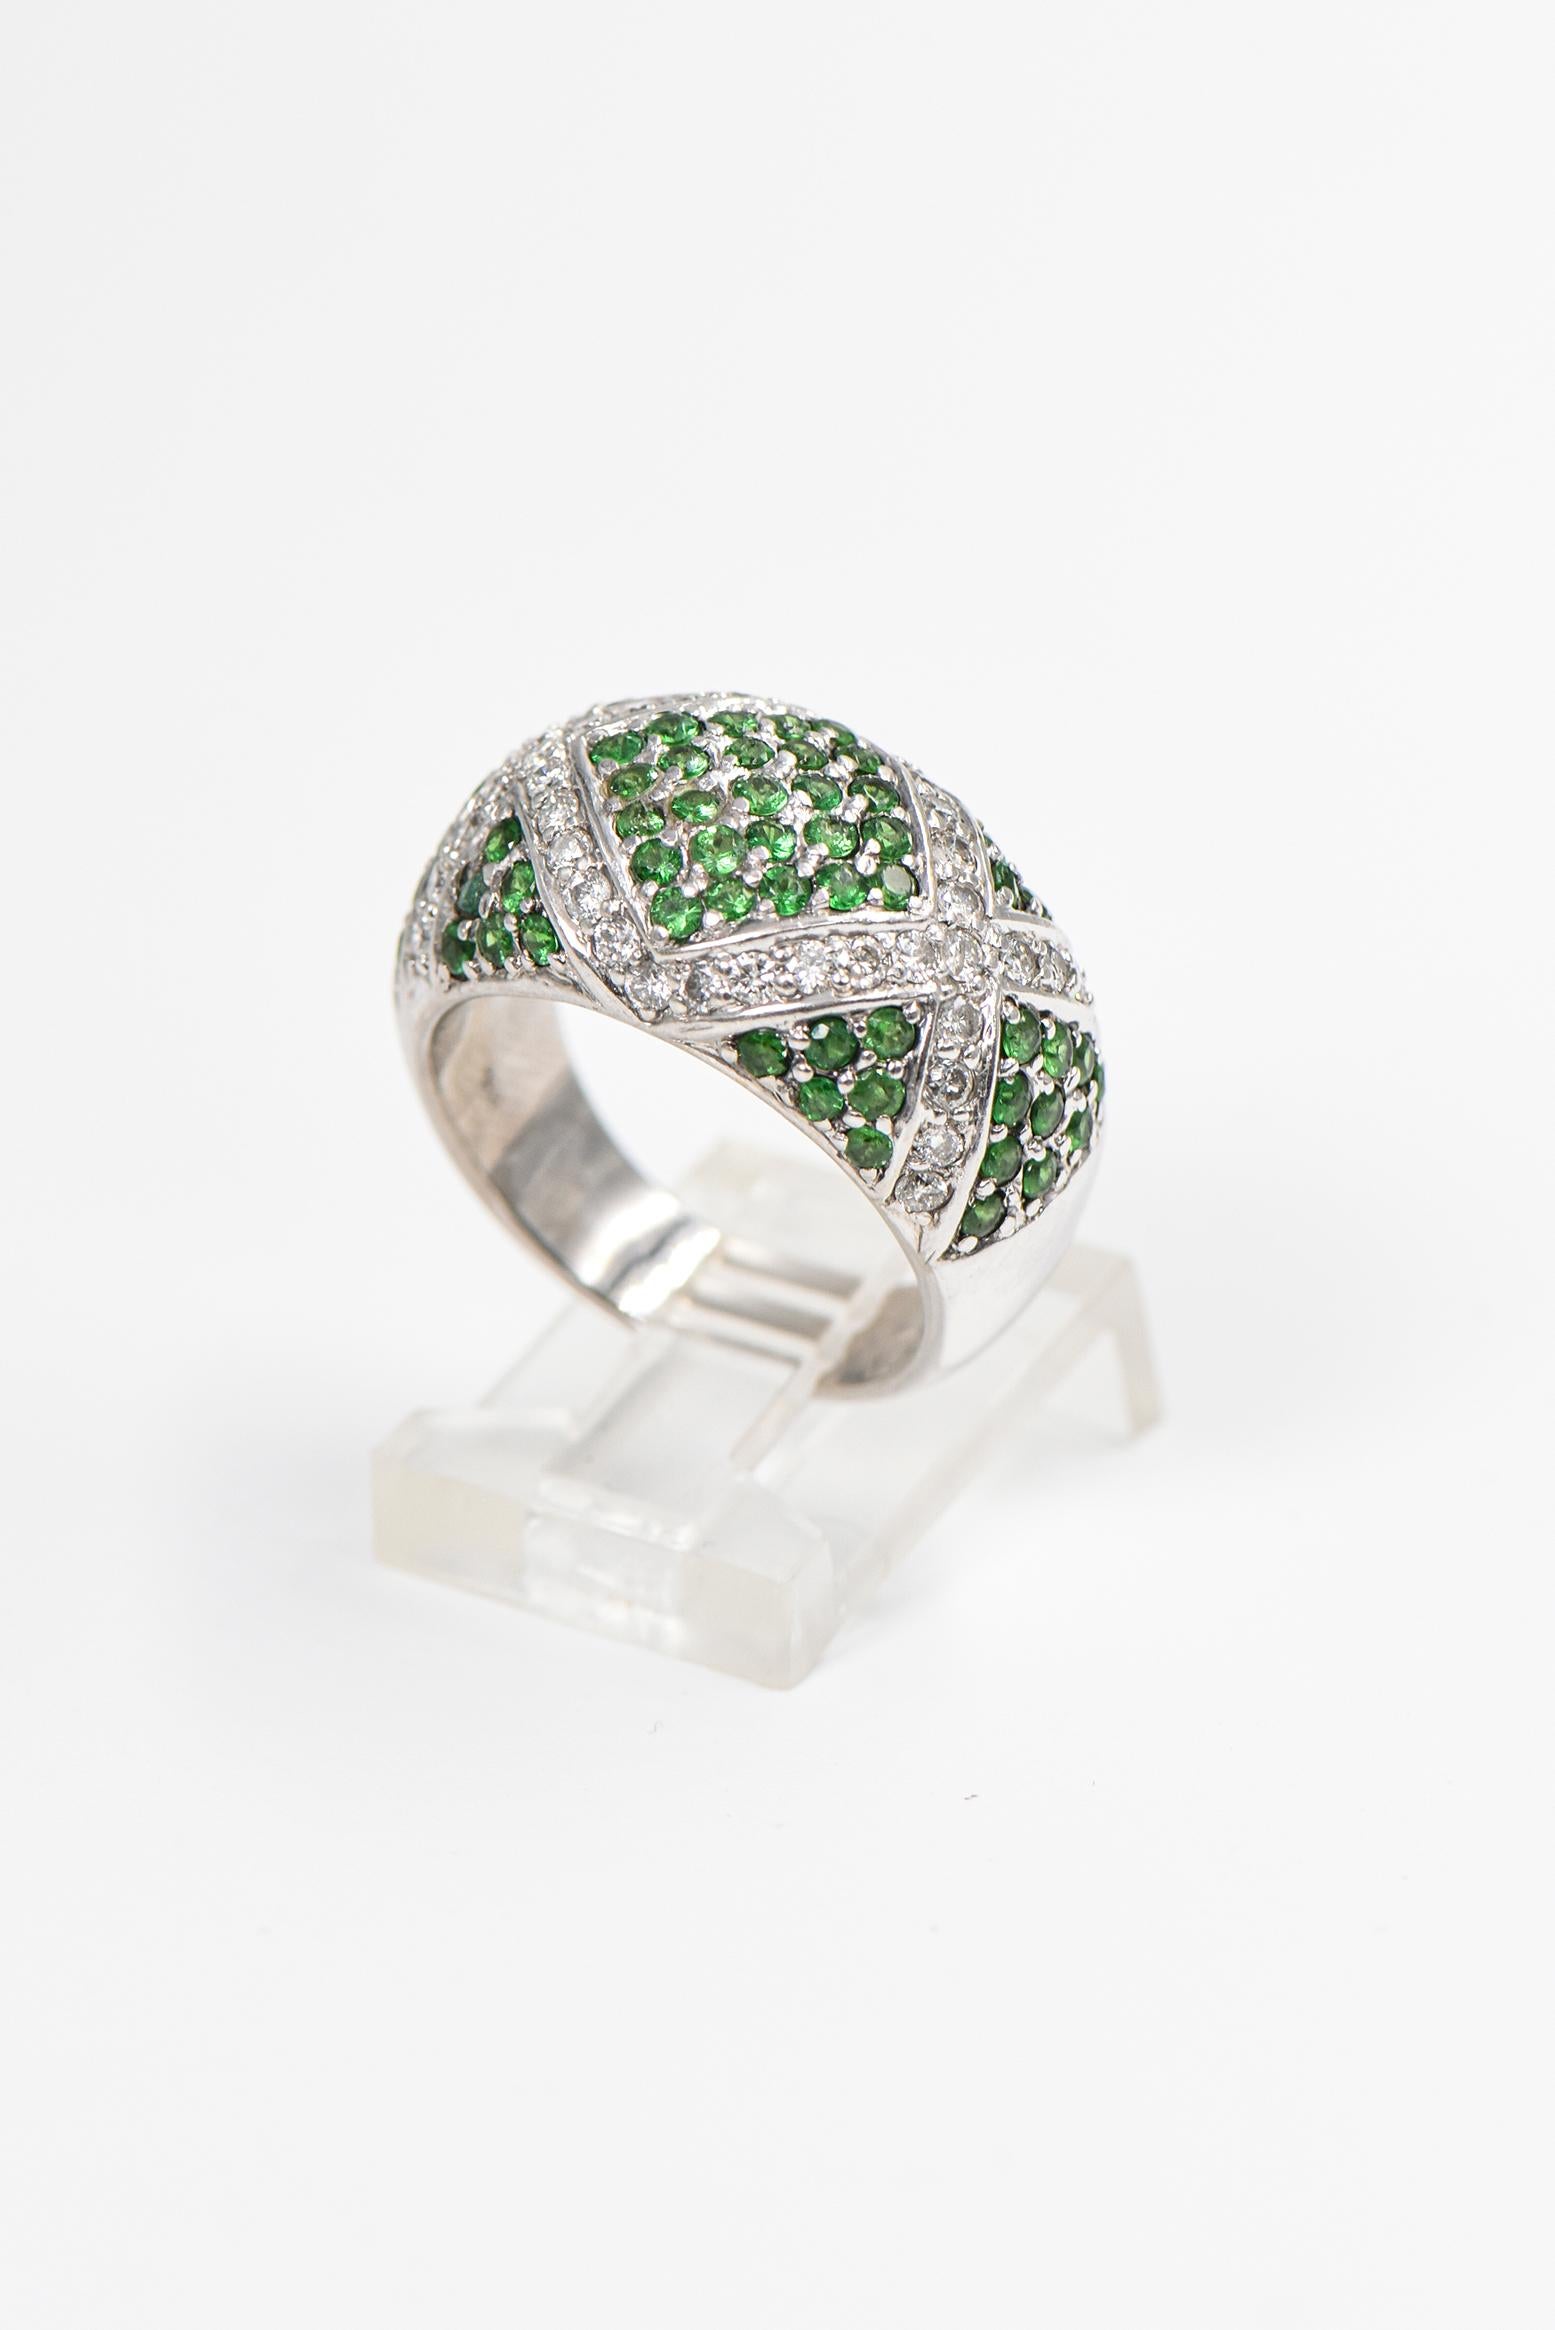 Tsavorite Garnet Diamond Dome Ring and Earrings White Gold Set In Good Condition For Sale In Miami Beach, FL